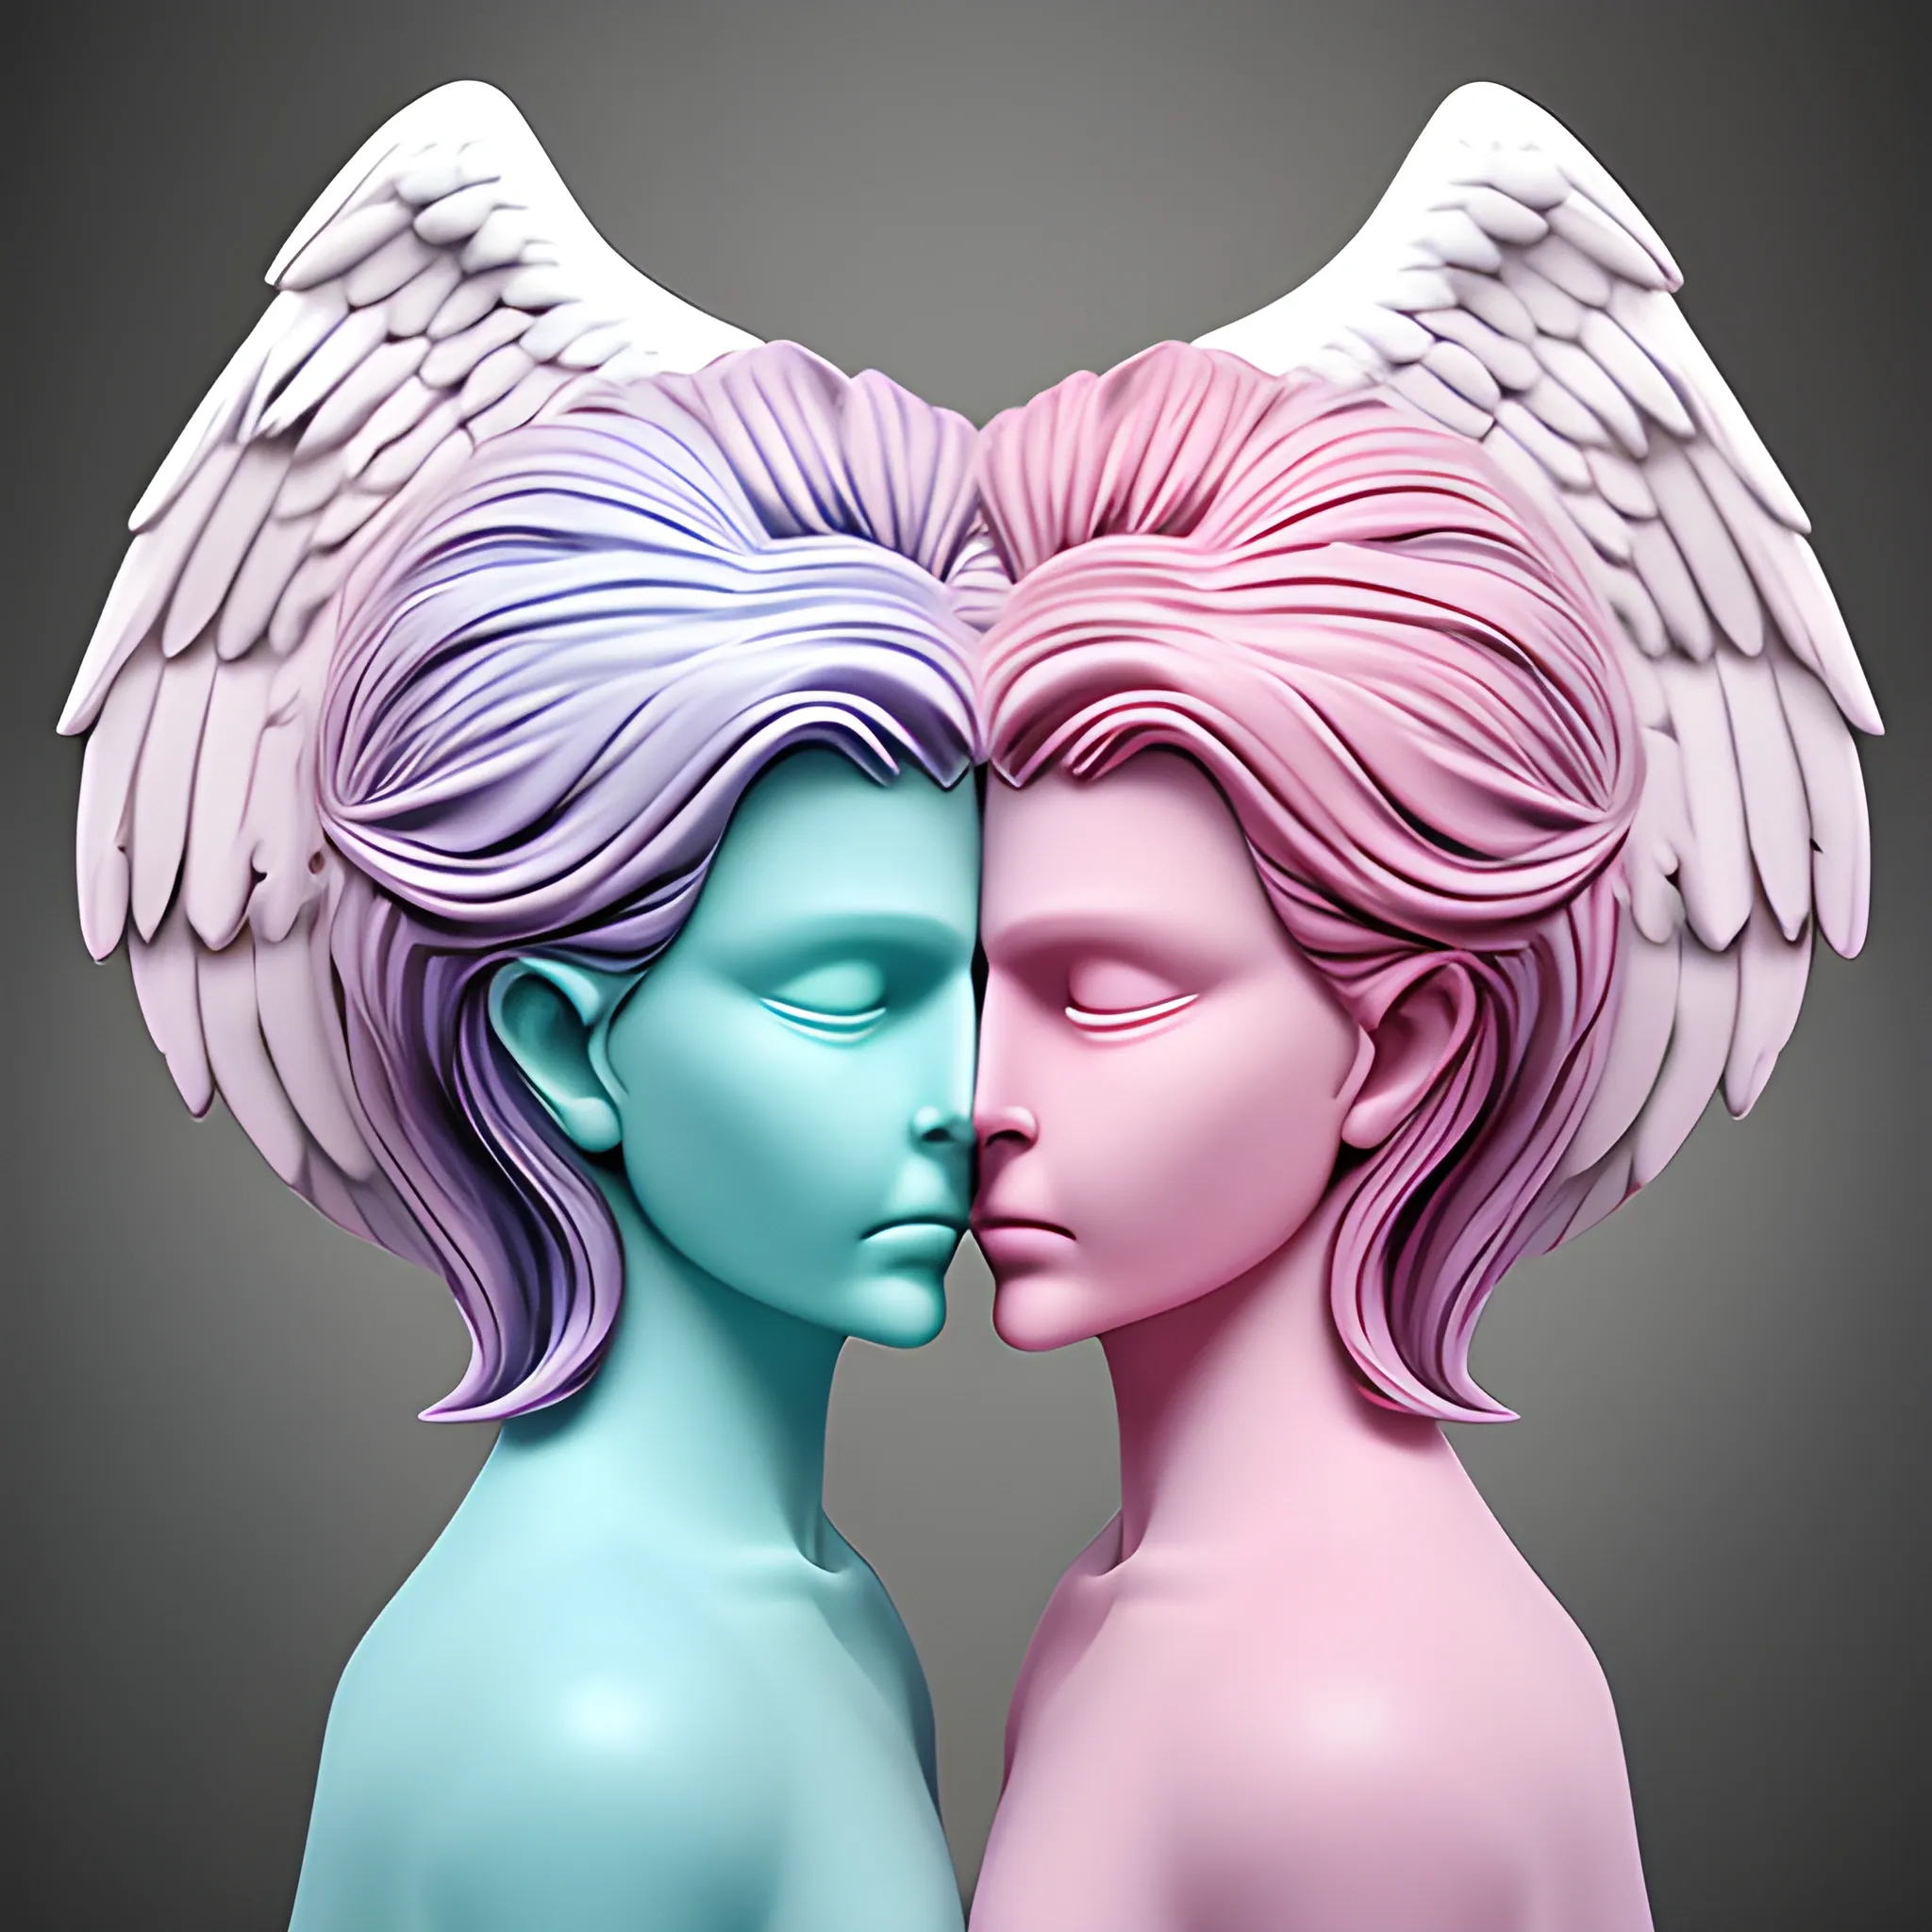 ethical dilemma angel one one shoulder and demon on the other shoulder, 8k, pastel colors